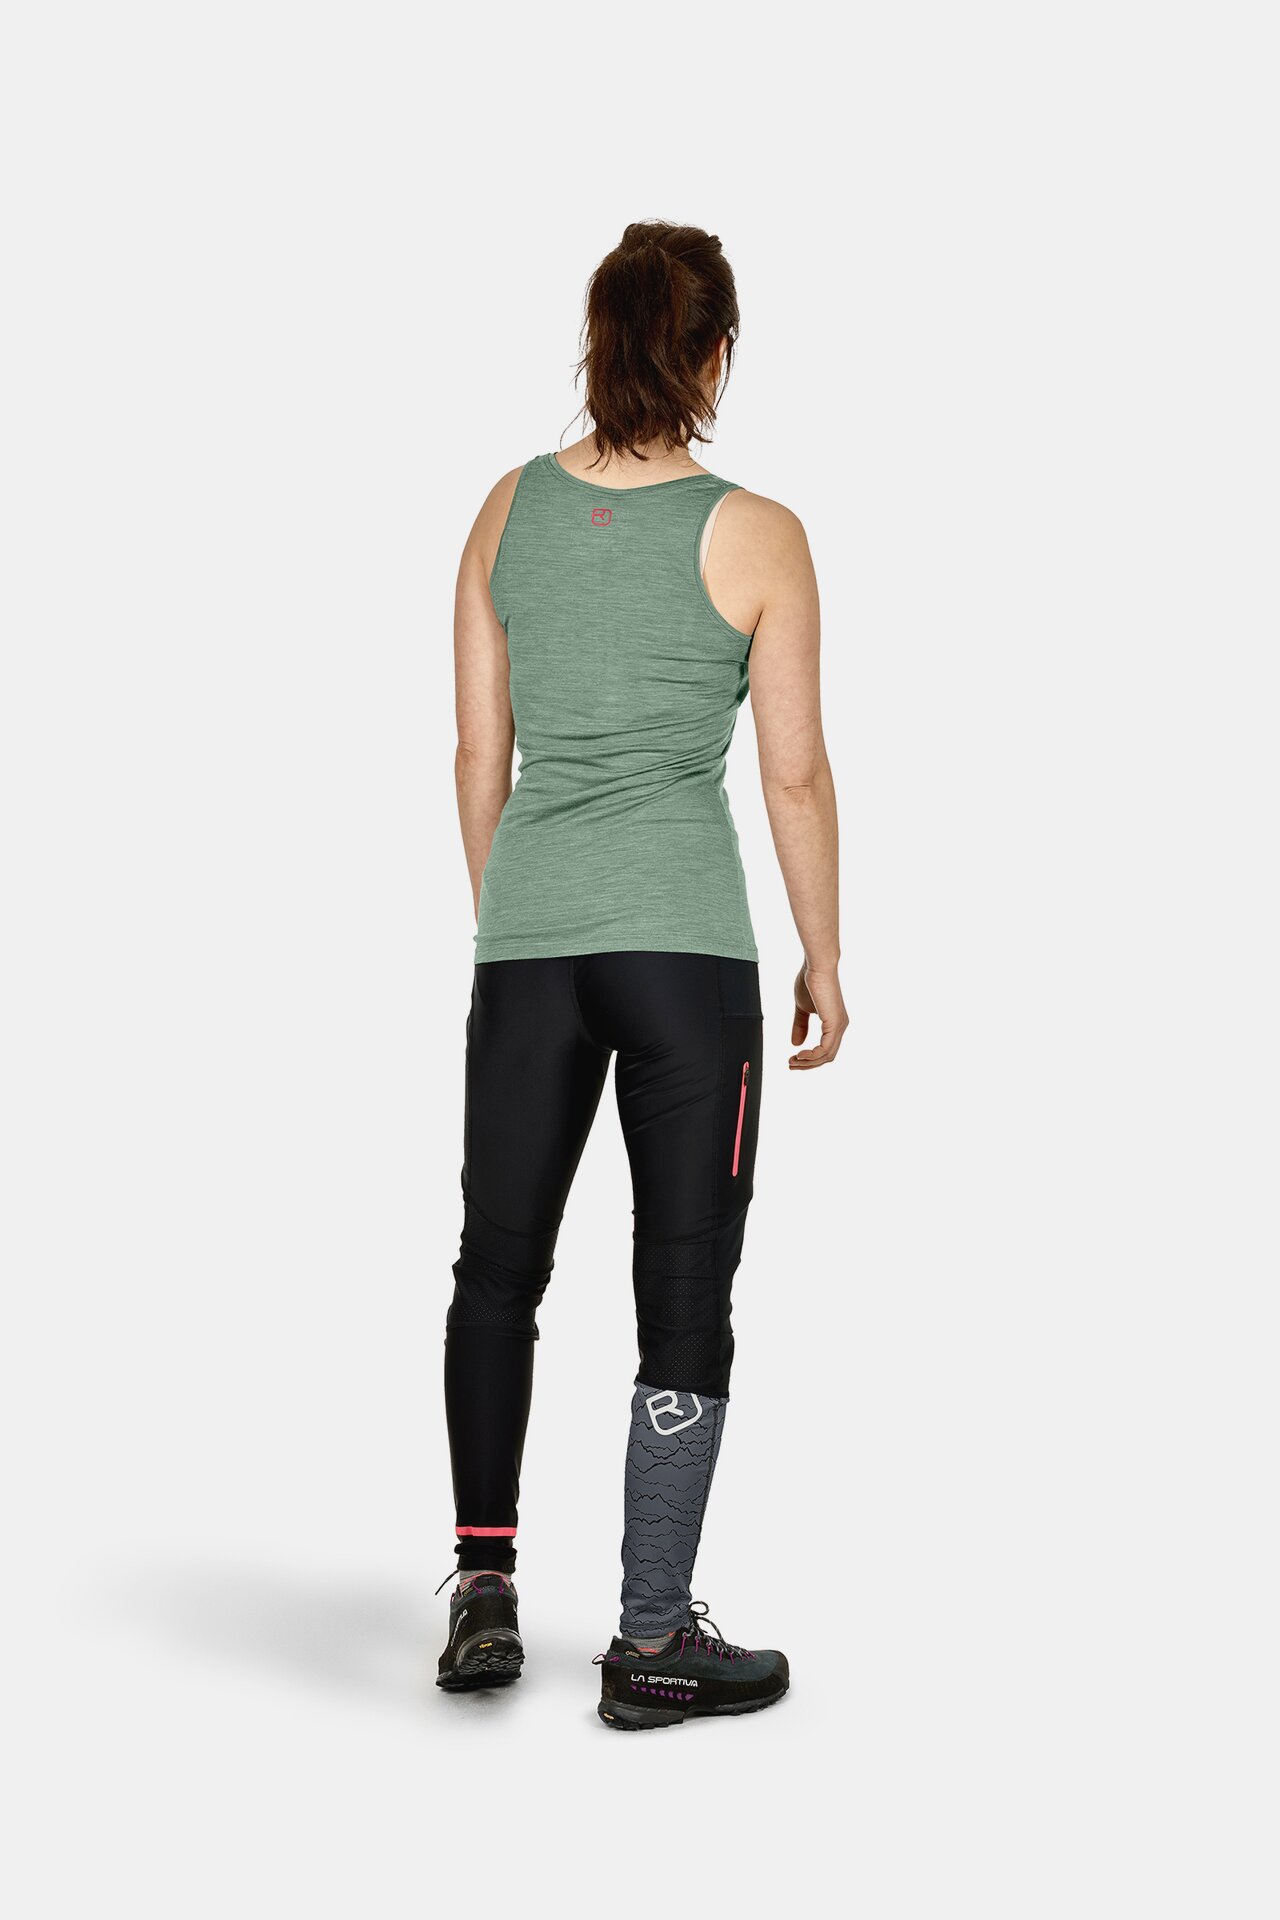 Avalanche NWT compression legging with four pockets 2 are cargo